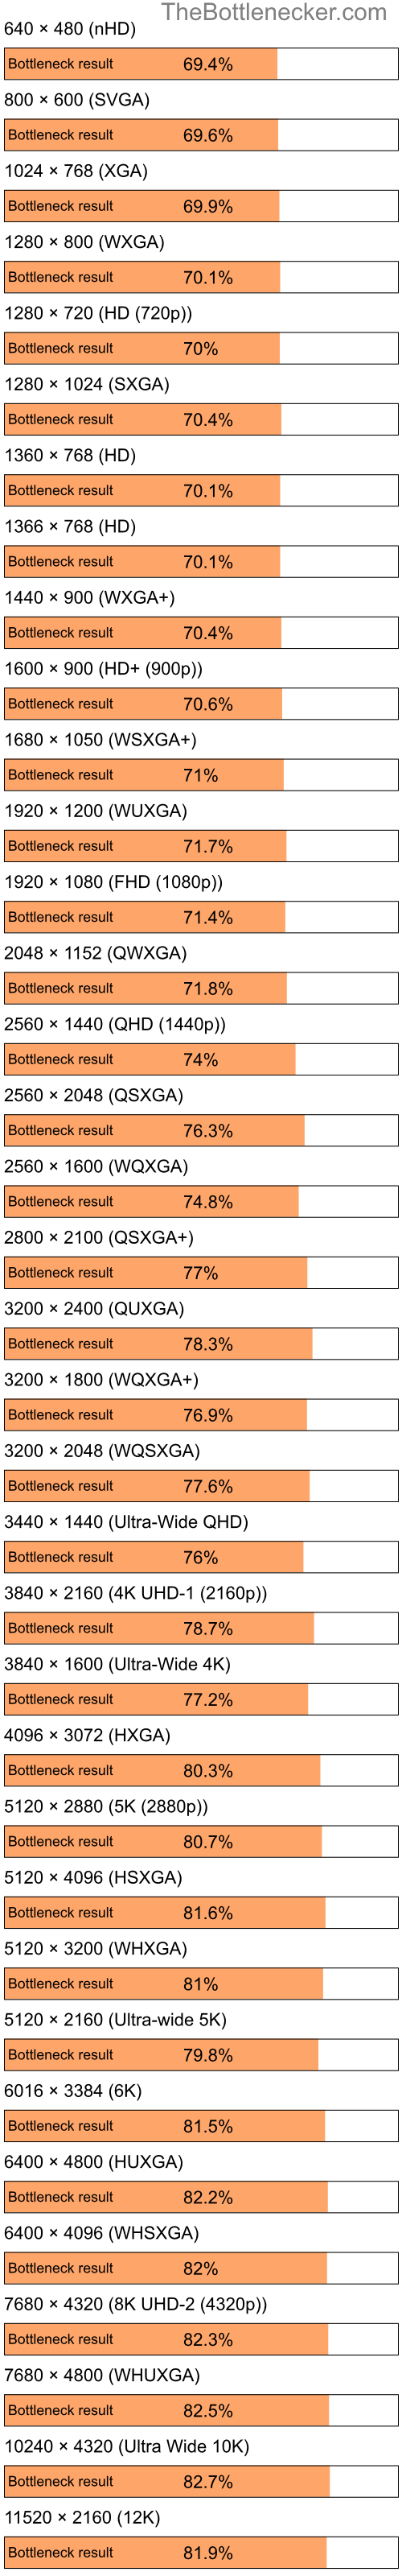 Bottleneck results by resolution for Intel Atom Z520 and NVIDIA GeForce 9400M in Graphic Card Intense Tasks